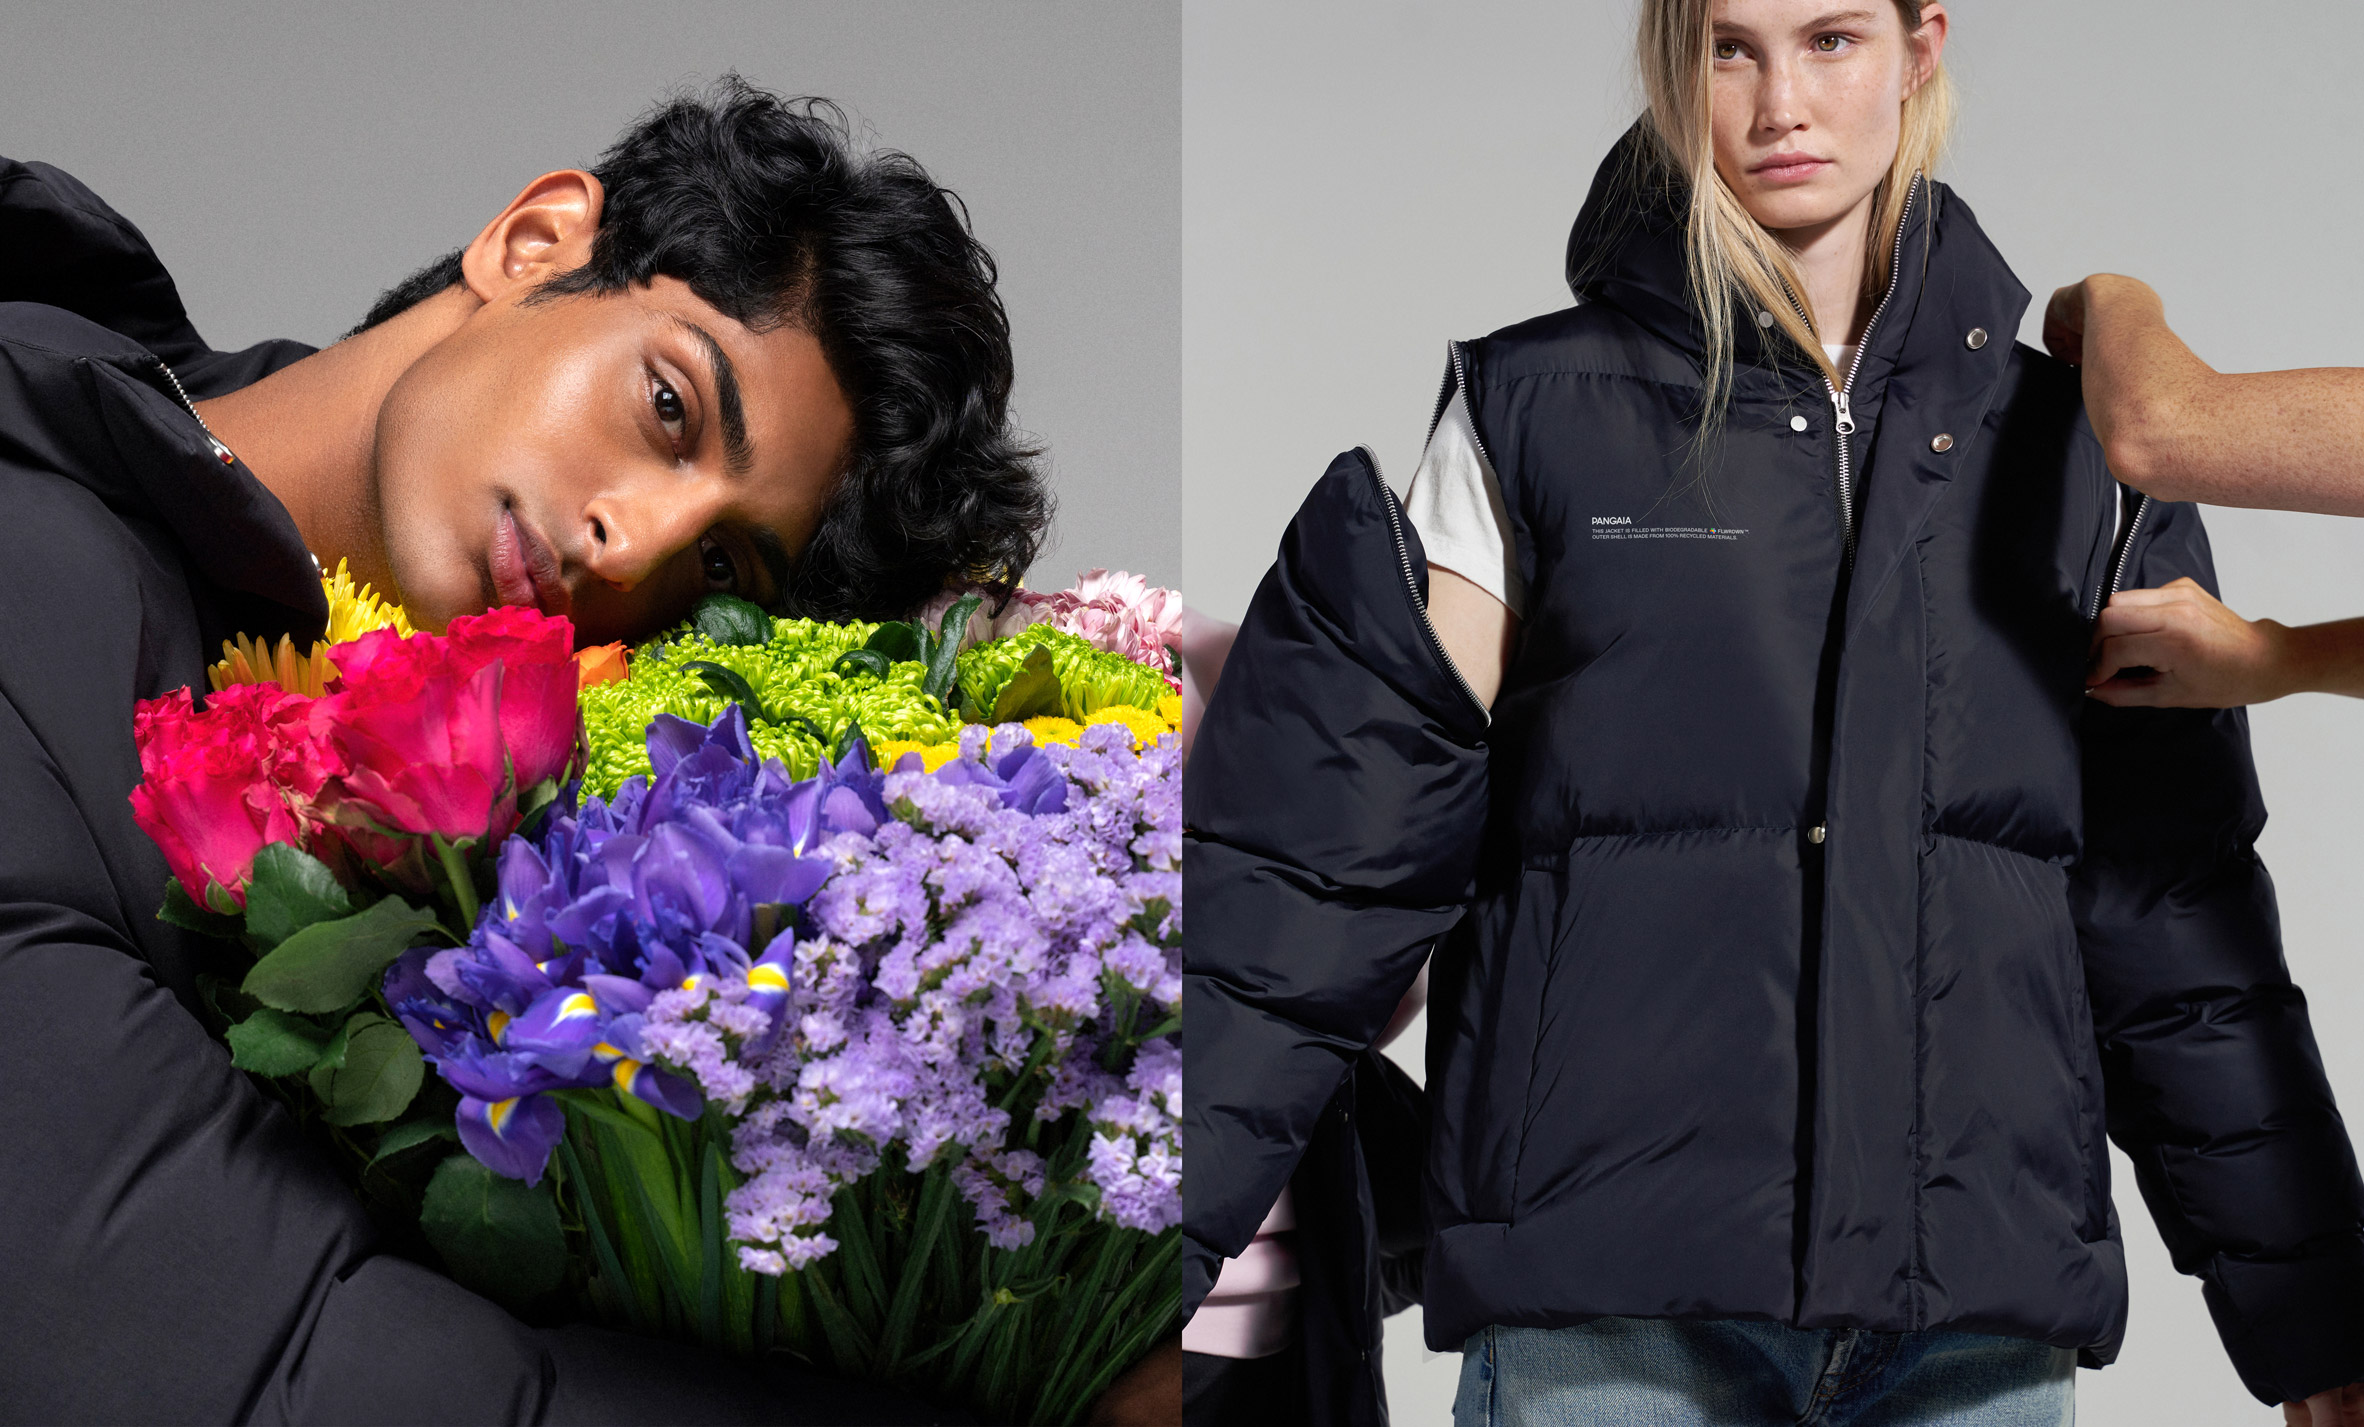 Pangaia's puffer jackets are filled with wildflowers rather than down